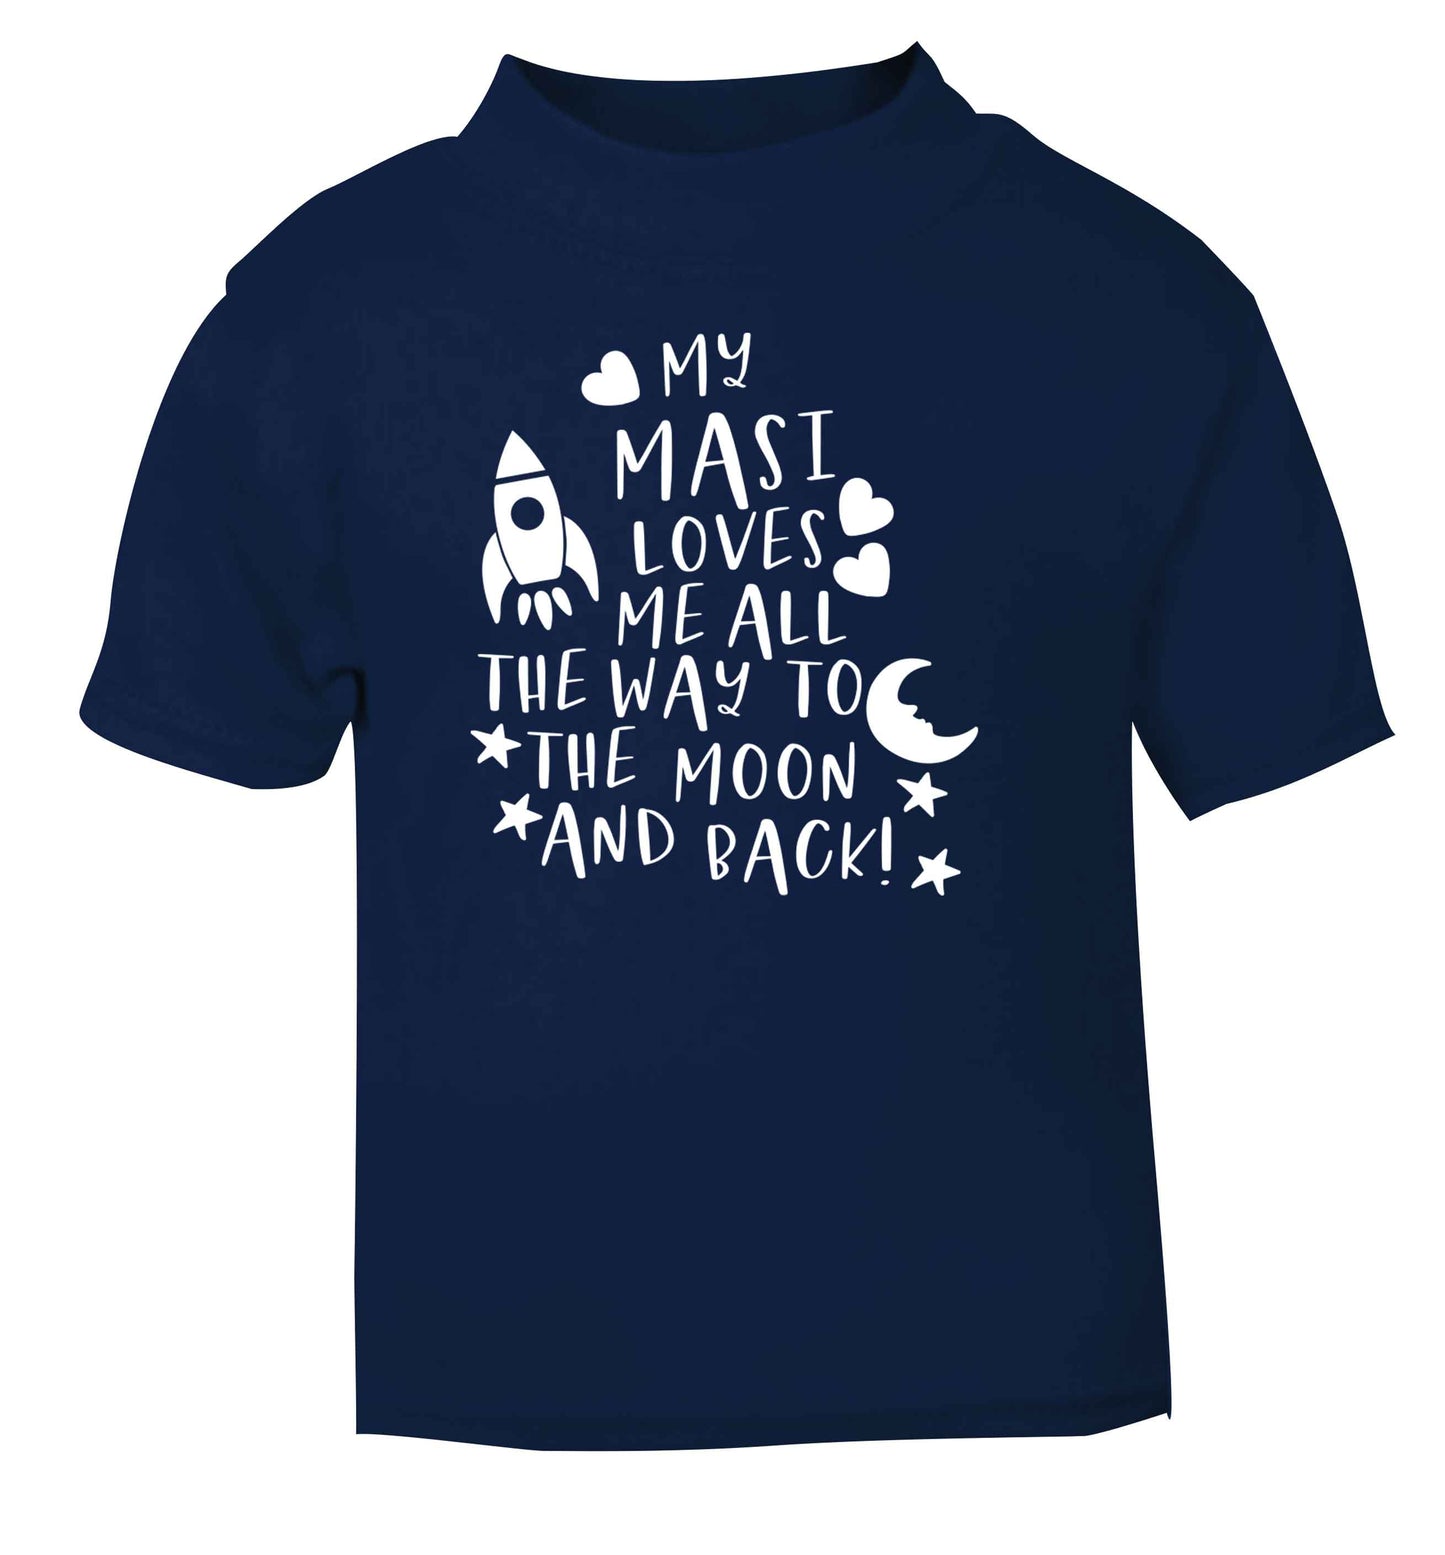 My masi loves me all the way to the moon and back navy Baby Toddler Tshirt 2 Years